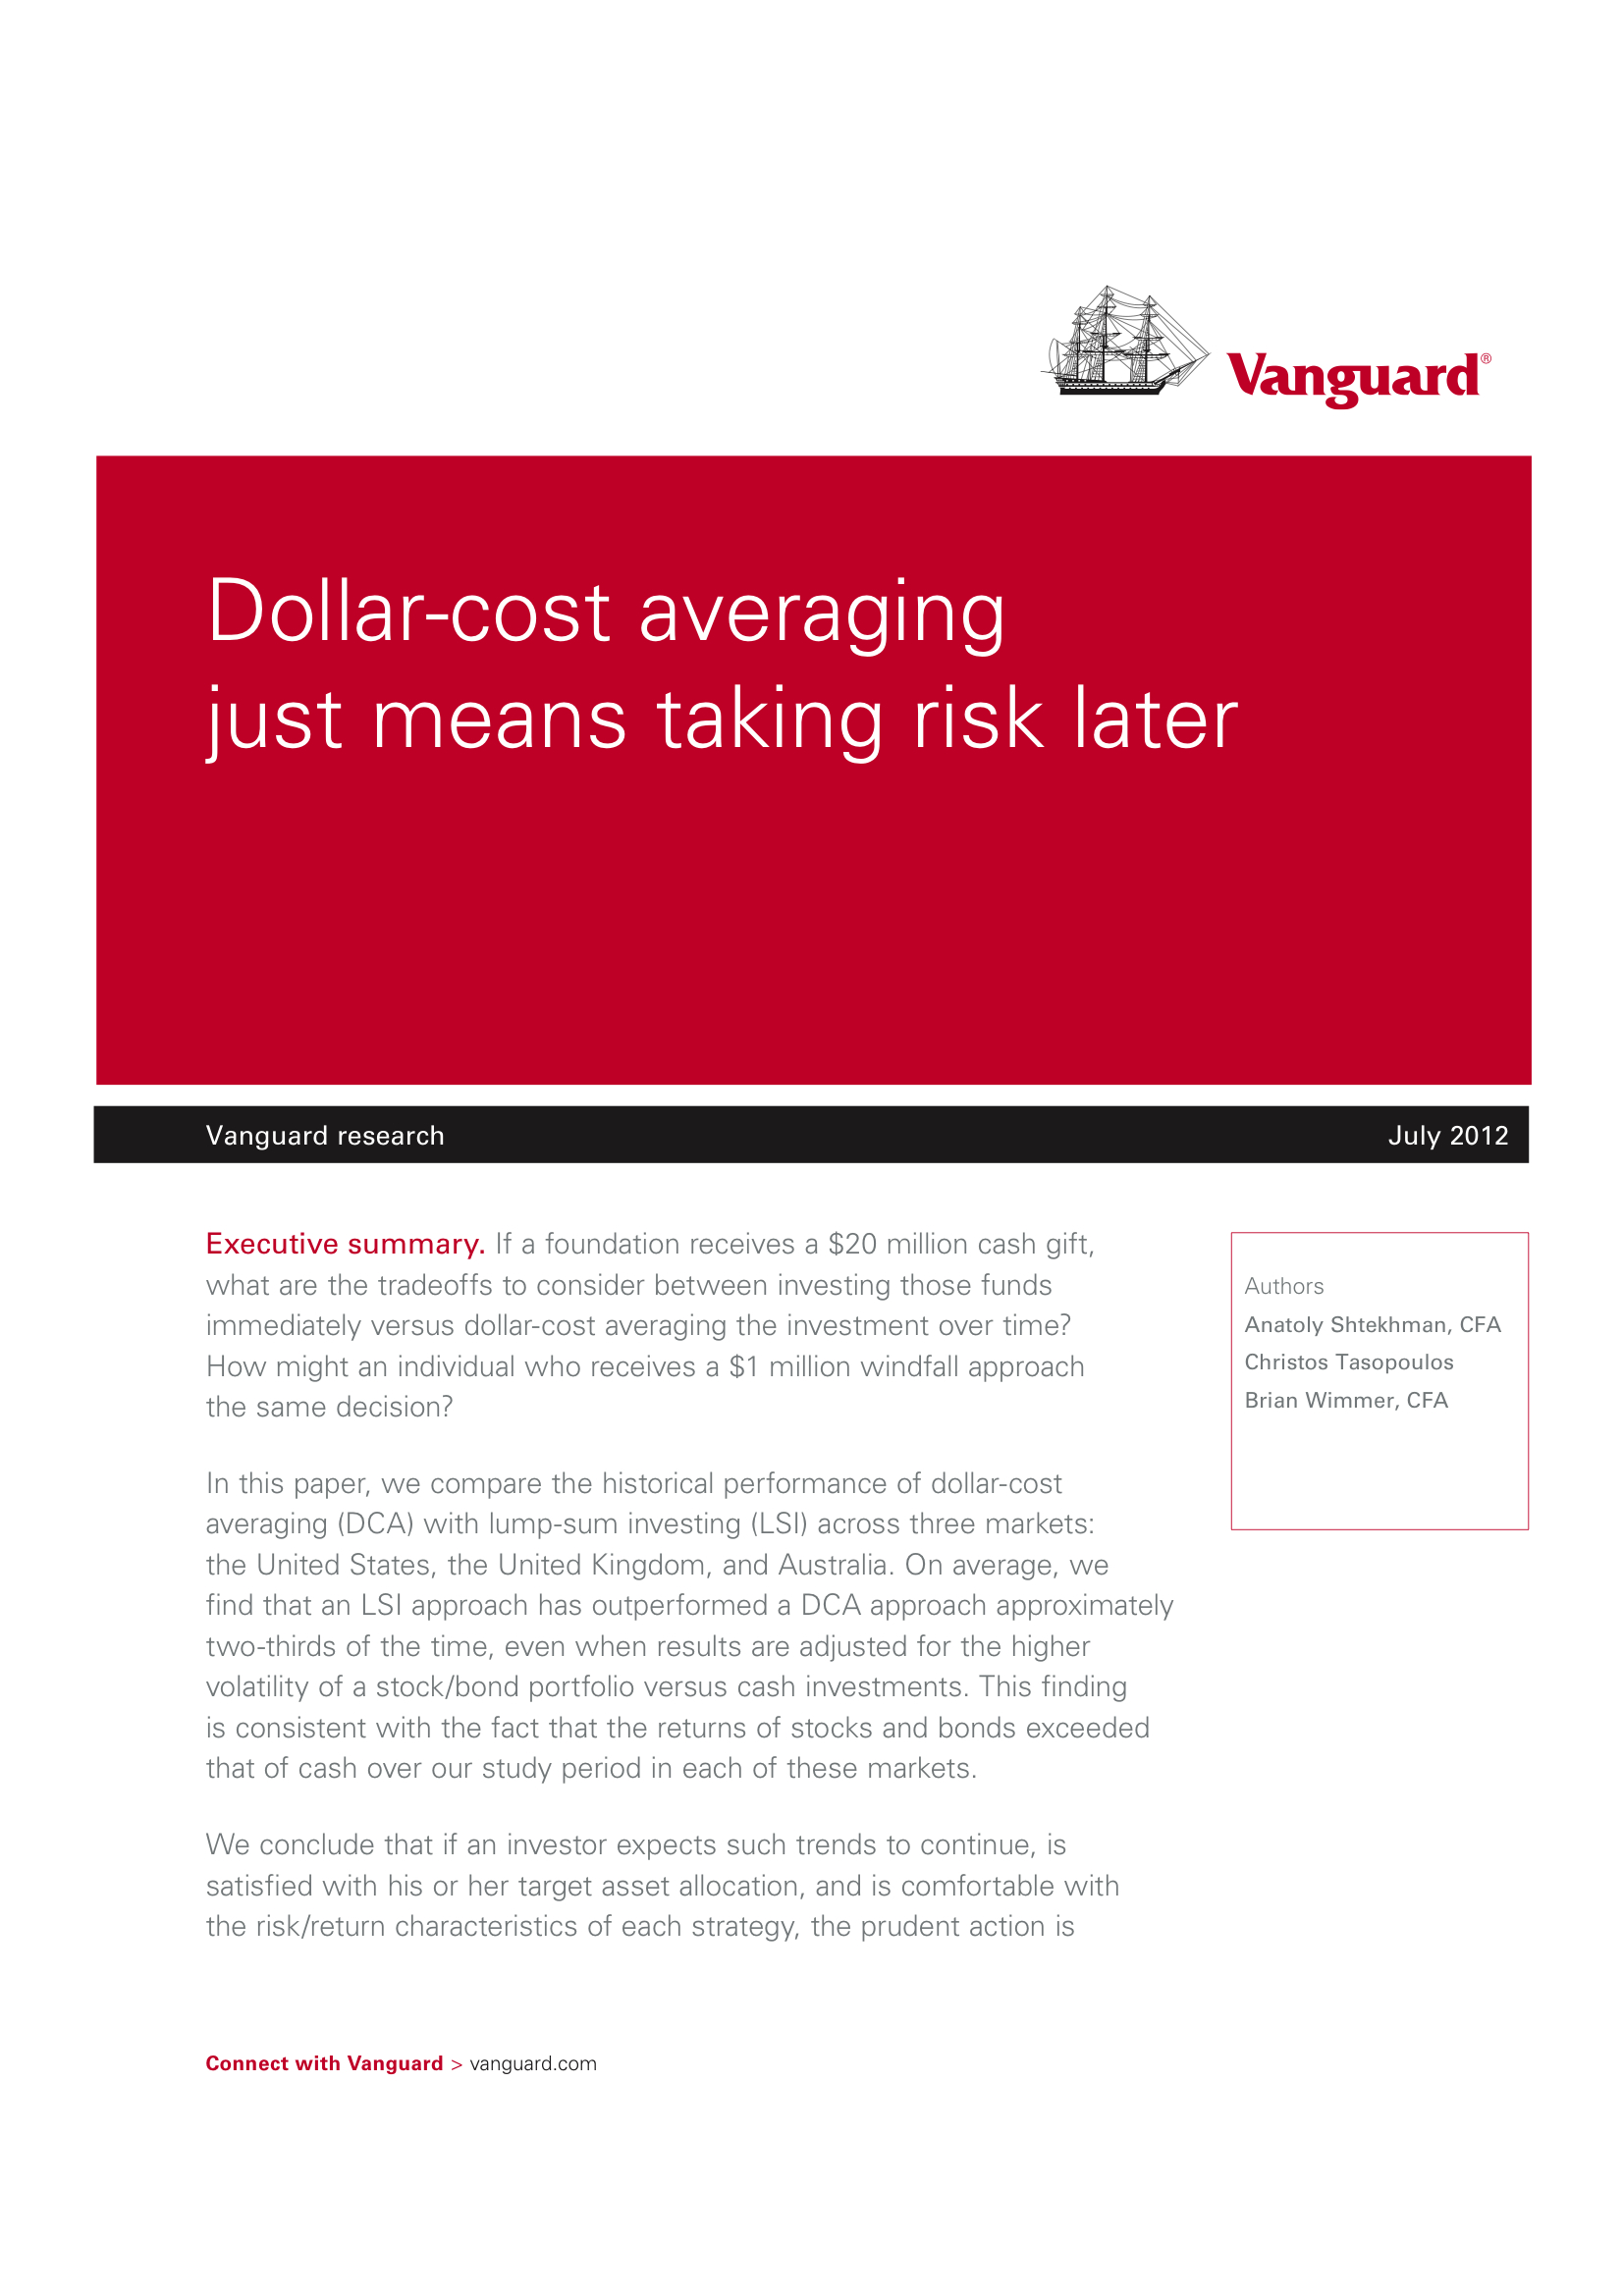 Vanguard Research: Dollar Cost Averaging Just Means Taking Risk Later